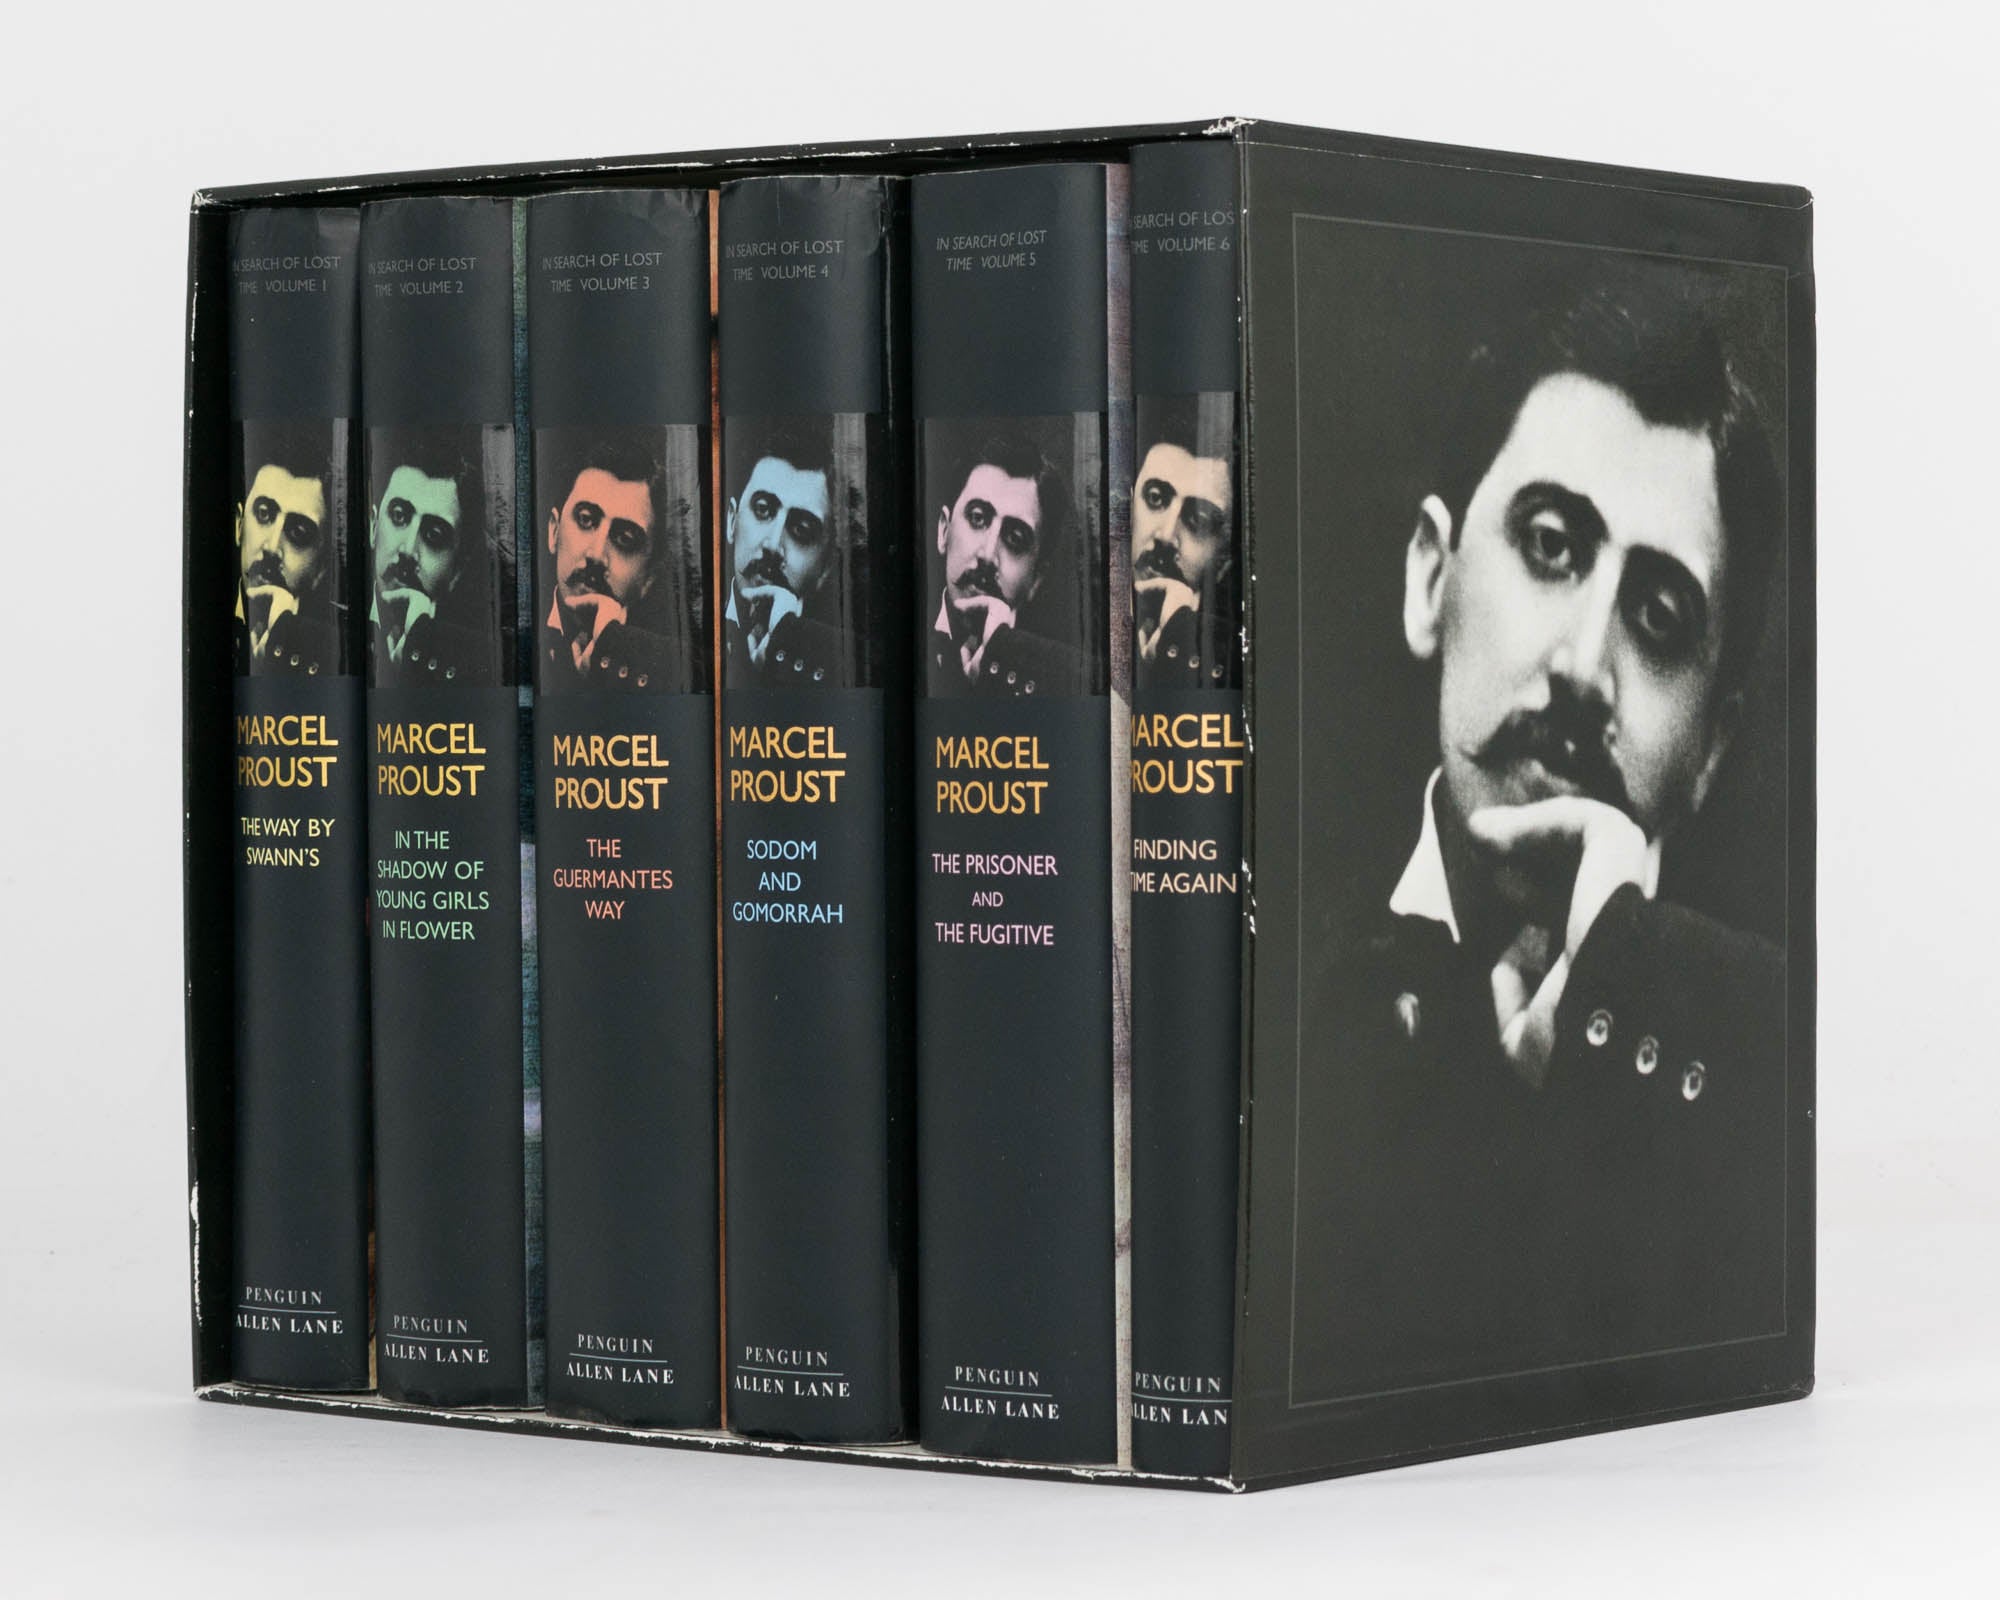 lade som om Cataract heroin In Search of Lost Time the complete set in six volumes | Marcel PROUST